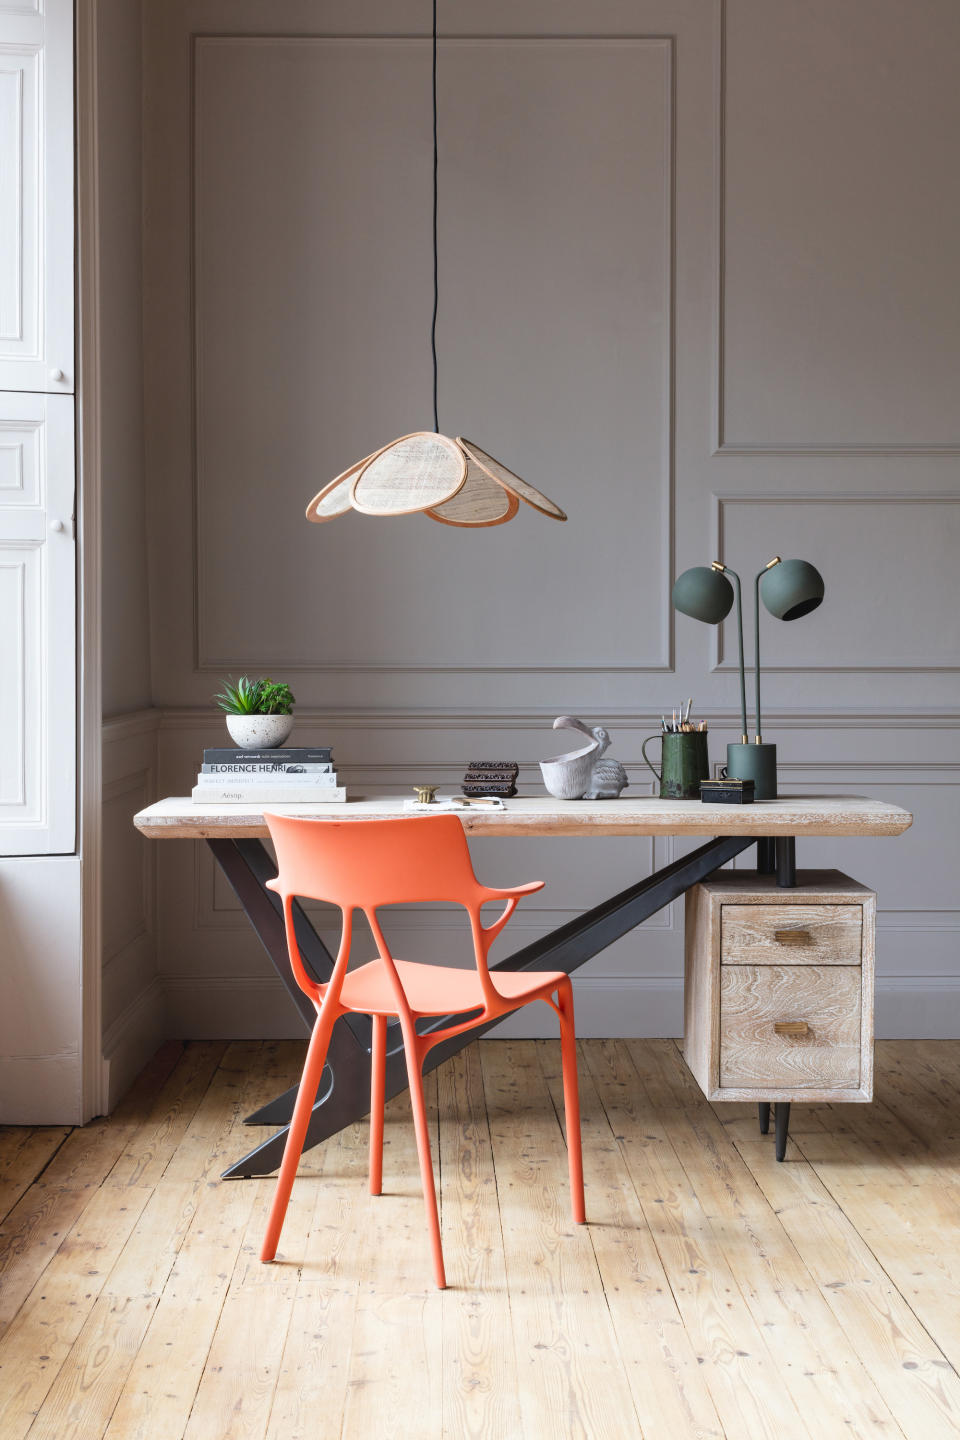 7. A neutral desk is a great base for color pops